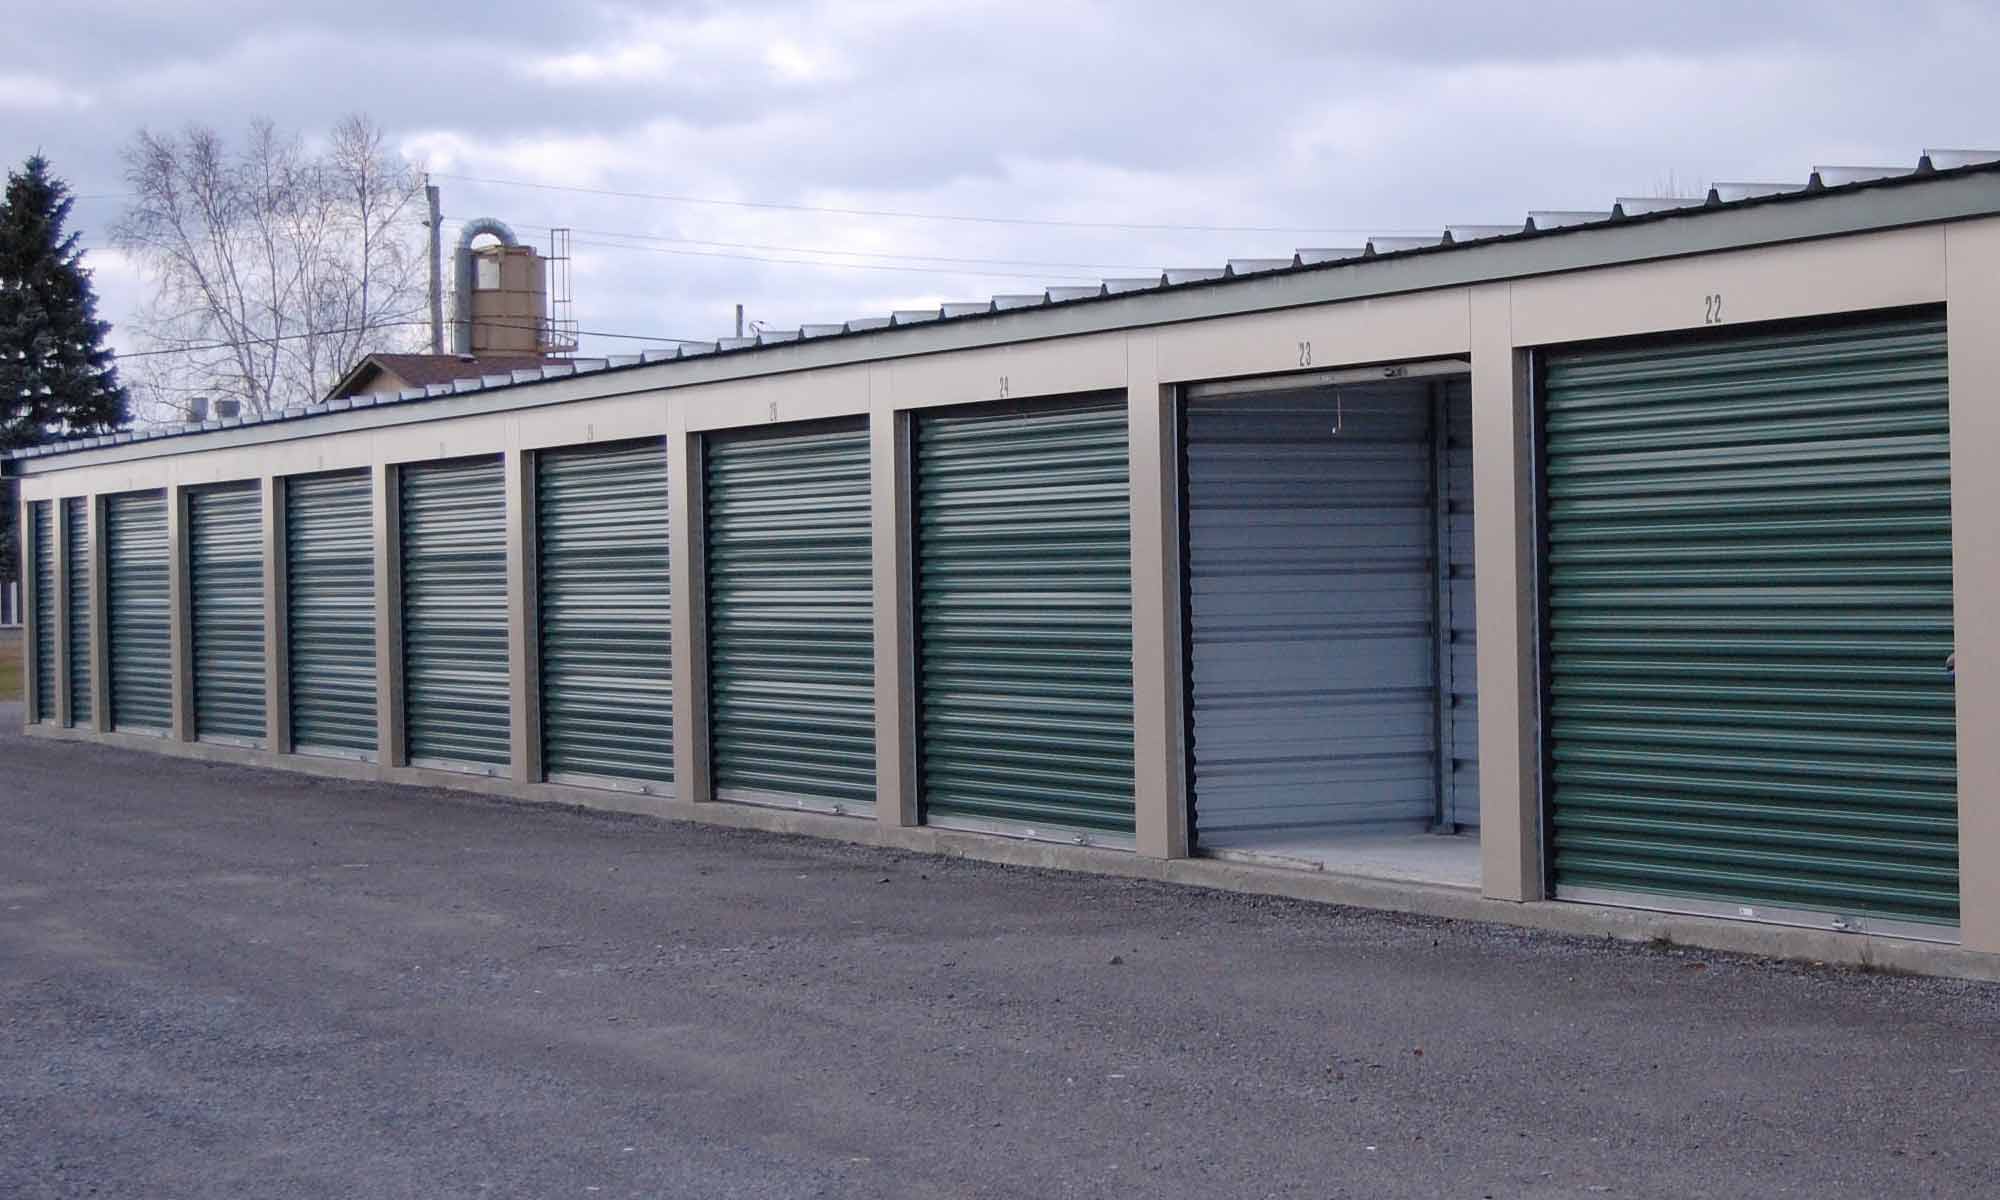 Image of one Self Storage building showing one unit open